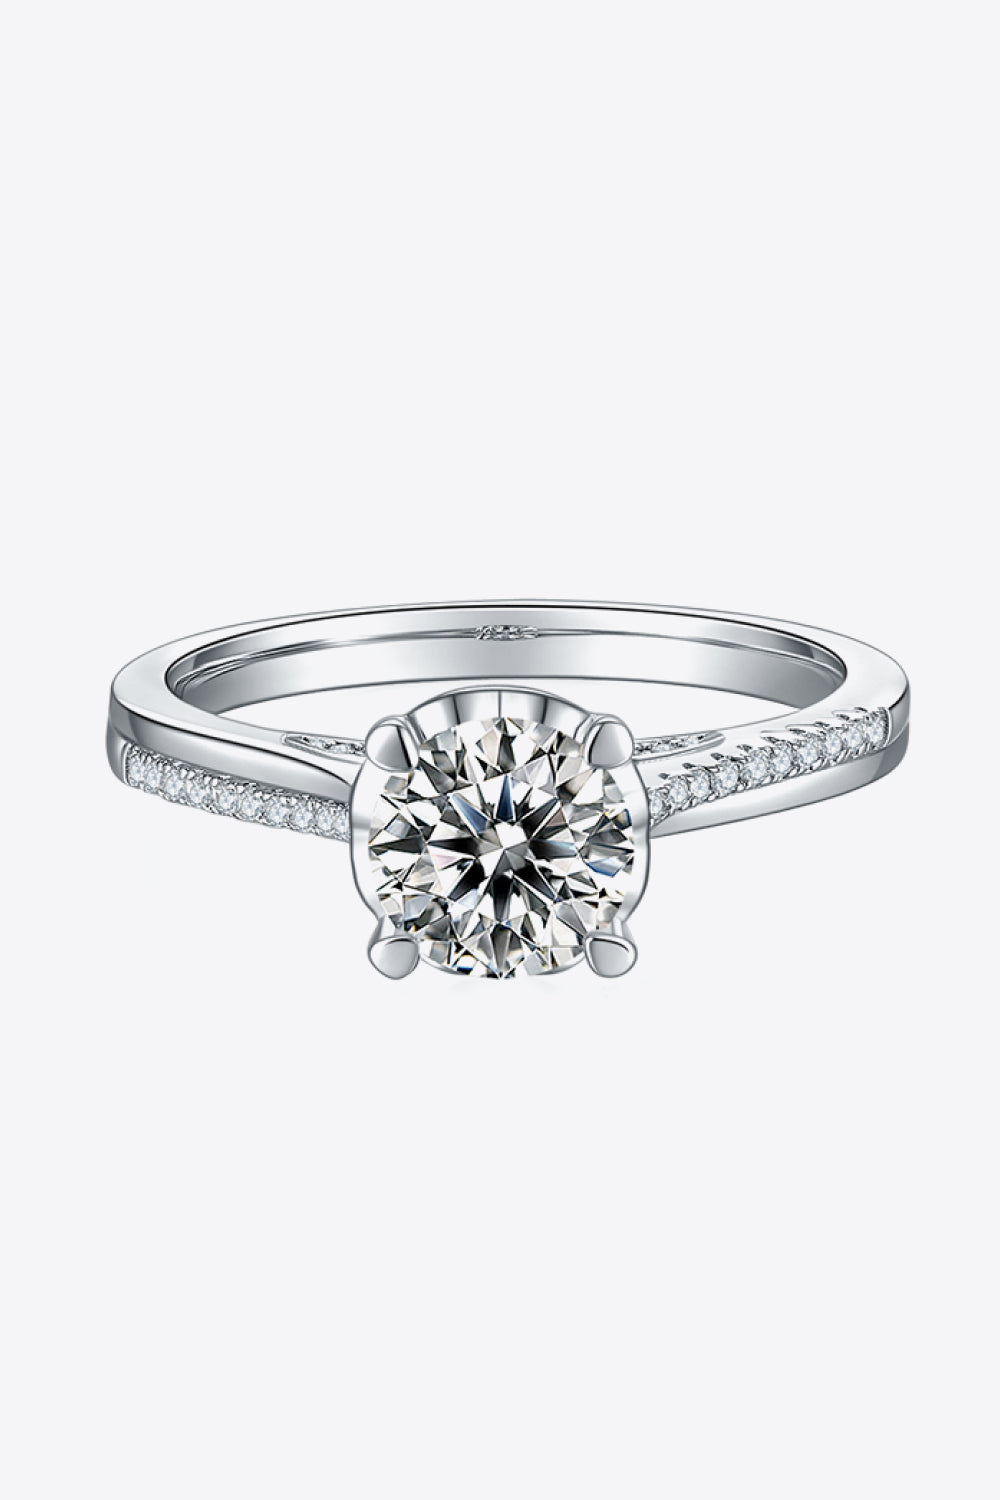 Adored 1 Ct Moissanite 925 Sterling Silver Side Stone Ring